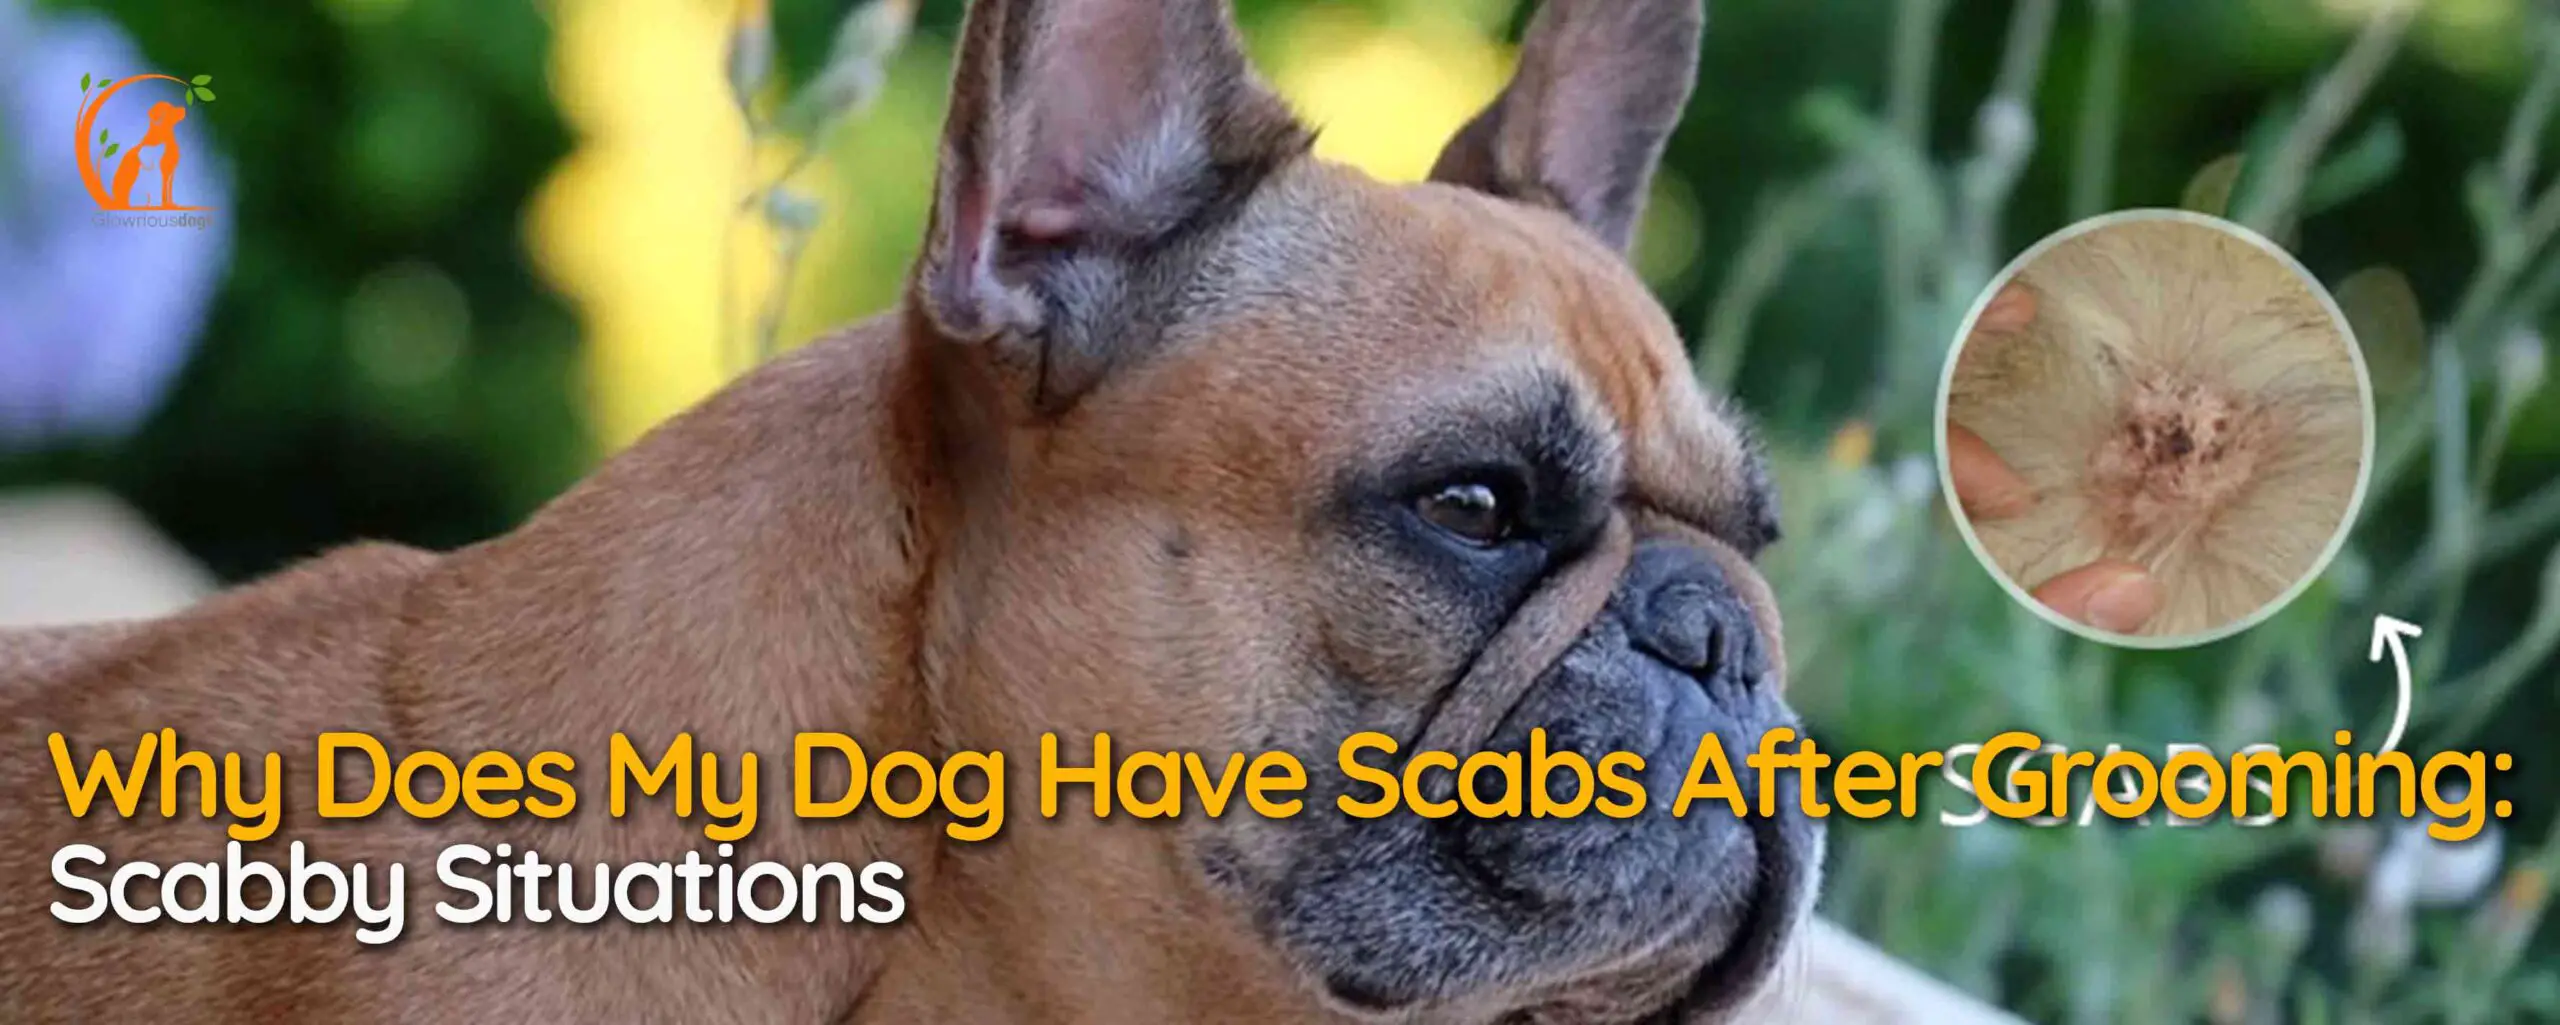 Why Does My Dog Have Scabs After Grooming: Scabby Situations